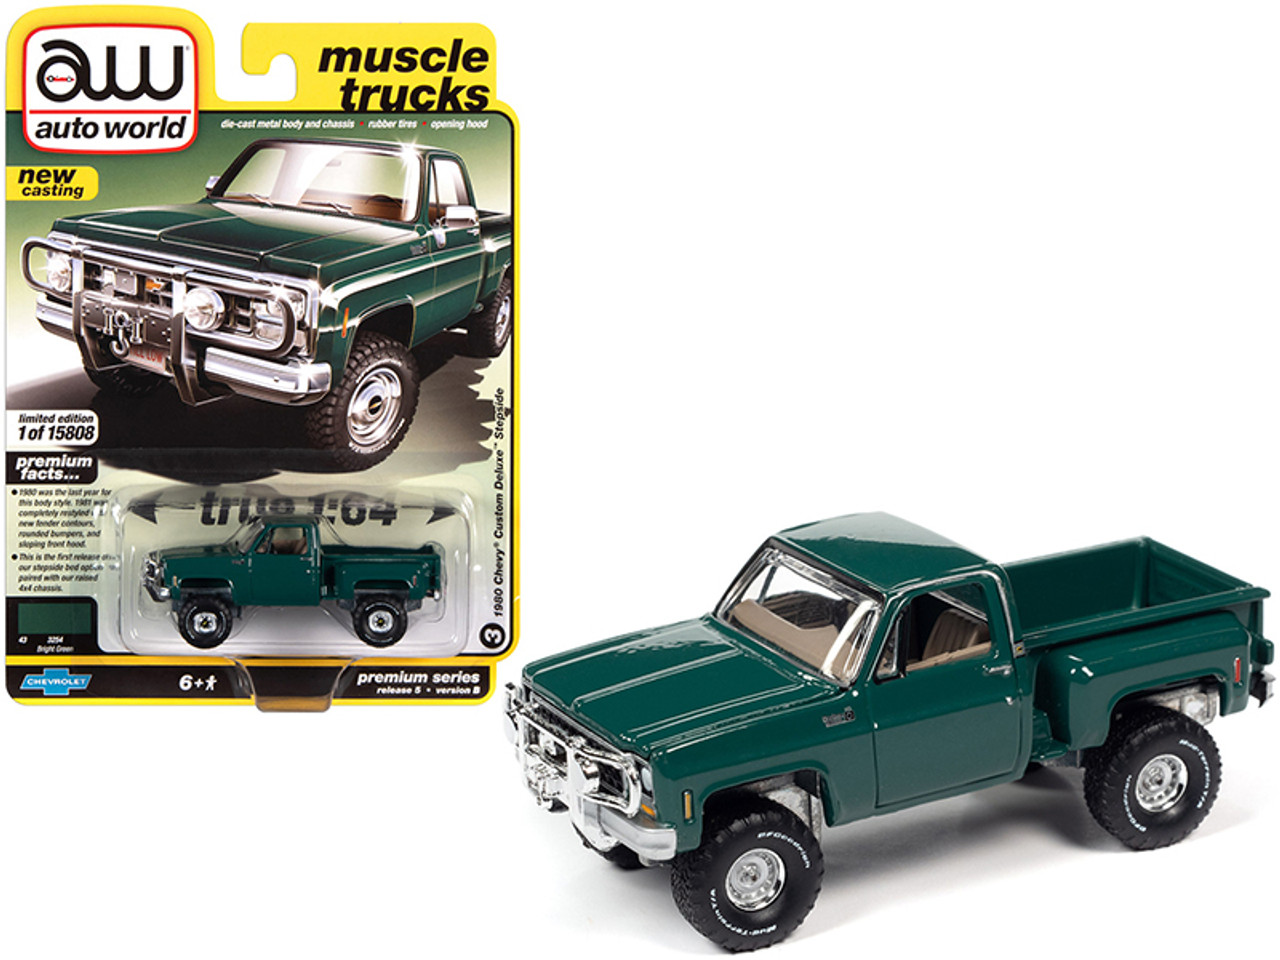 1980 Chevrolet Custom Deluxe Stepside Pickup Truck Green "Muscle Trucks" Limited Edition to 15808 pieces Worldwide 1/64 Diecast Model Car by Autoworld